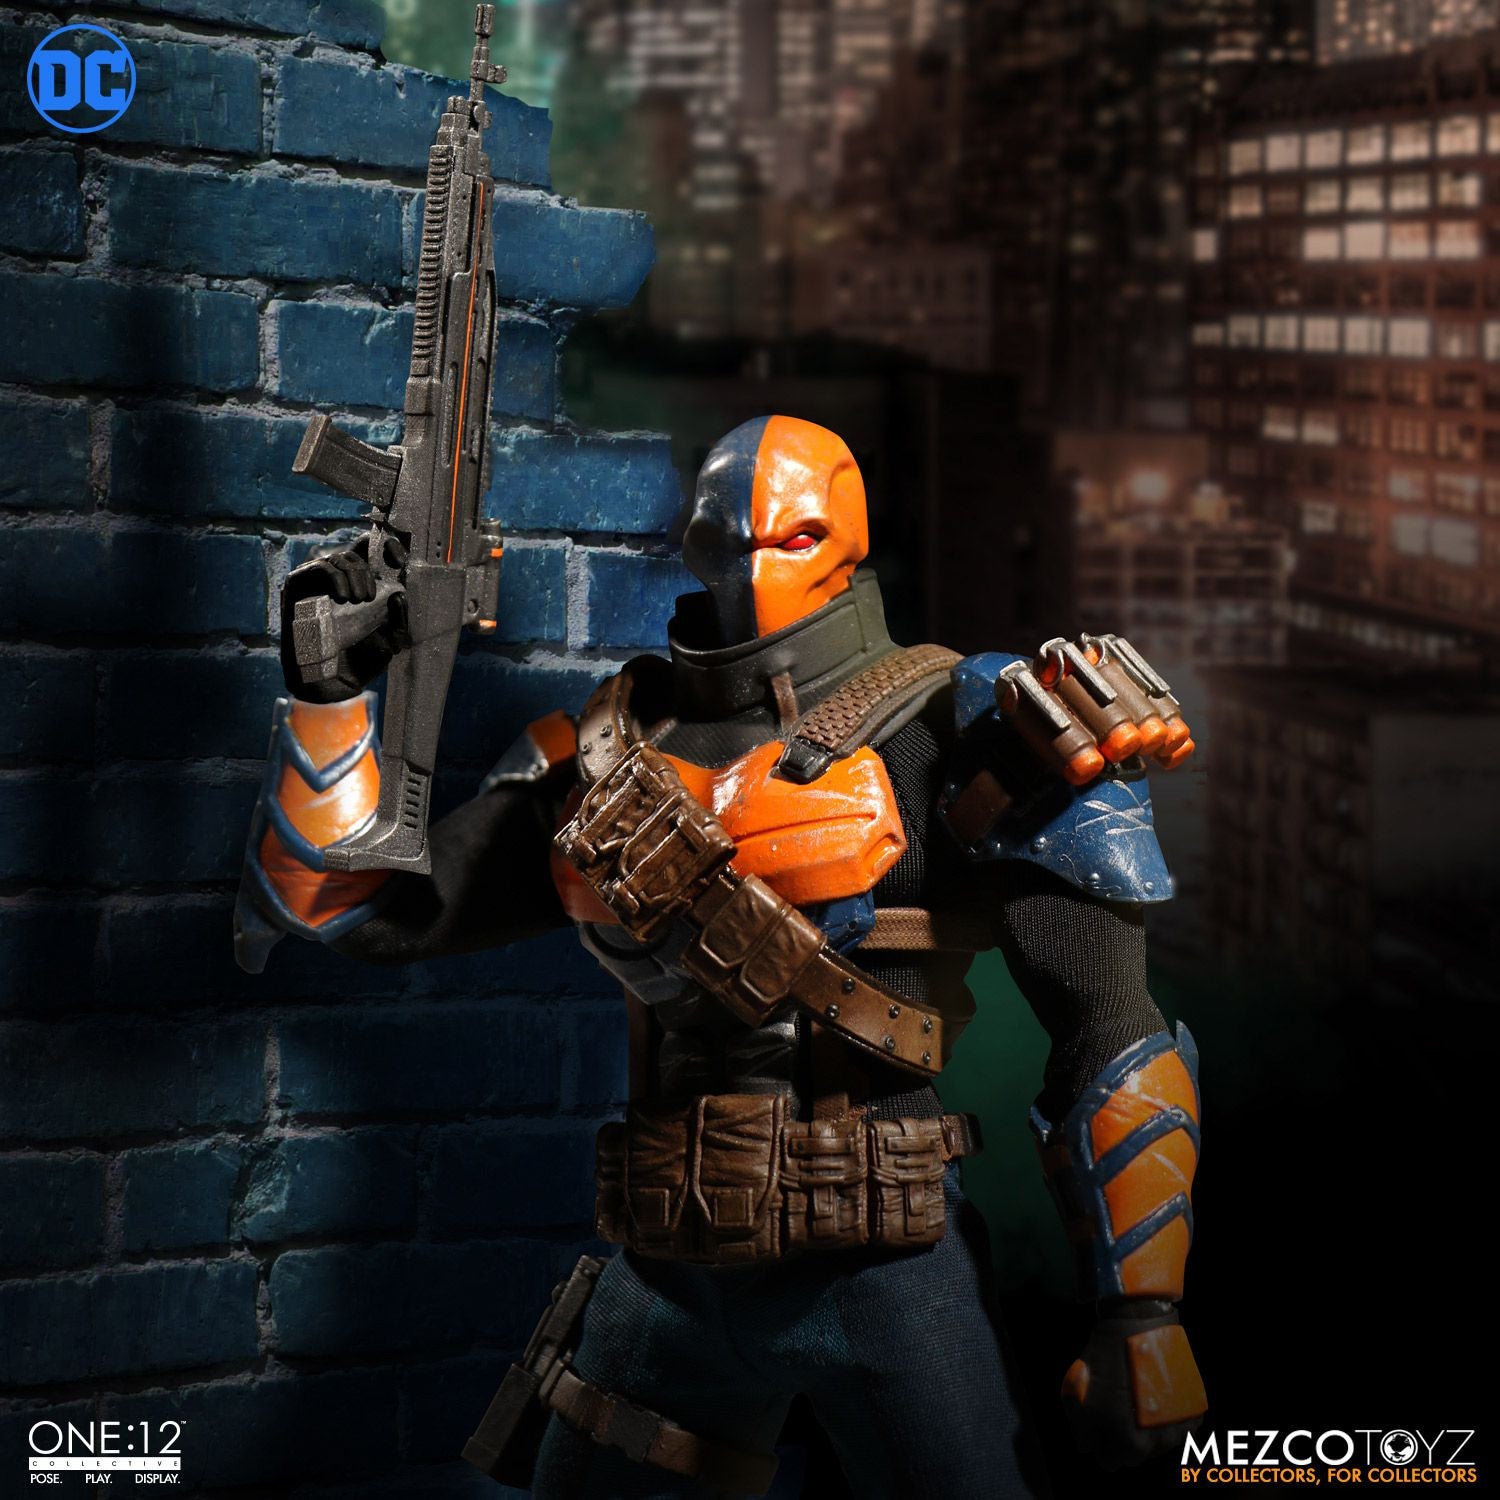 Mezco - One:12 Collective - Deathstroke - Marvelous Toys